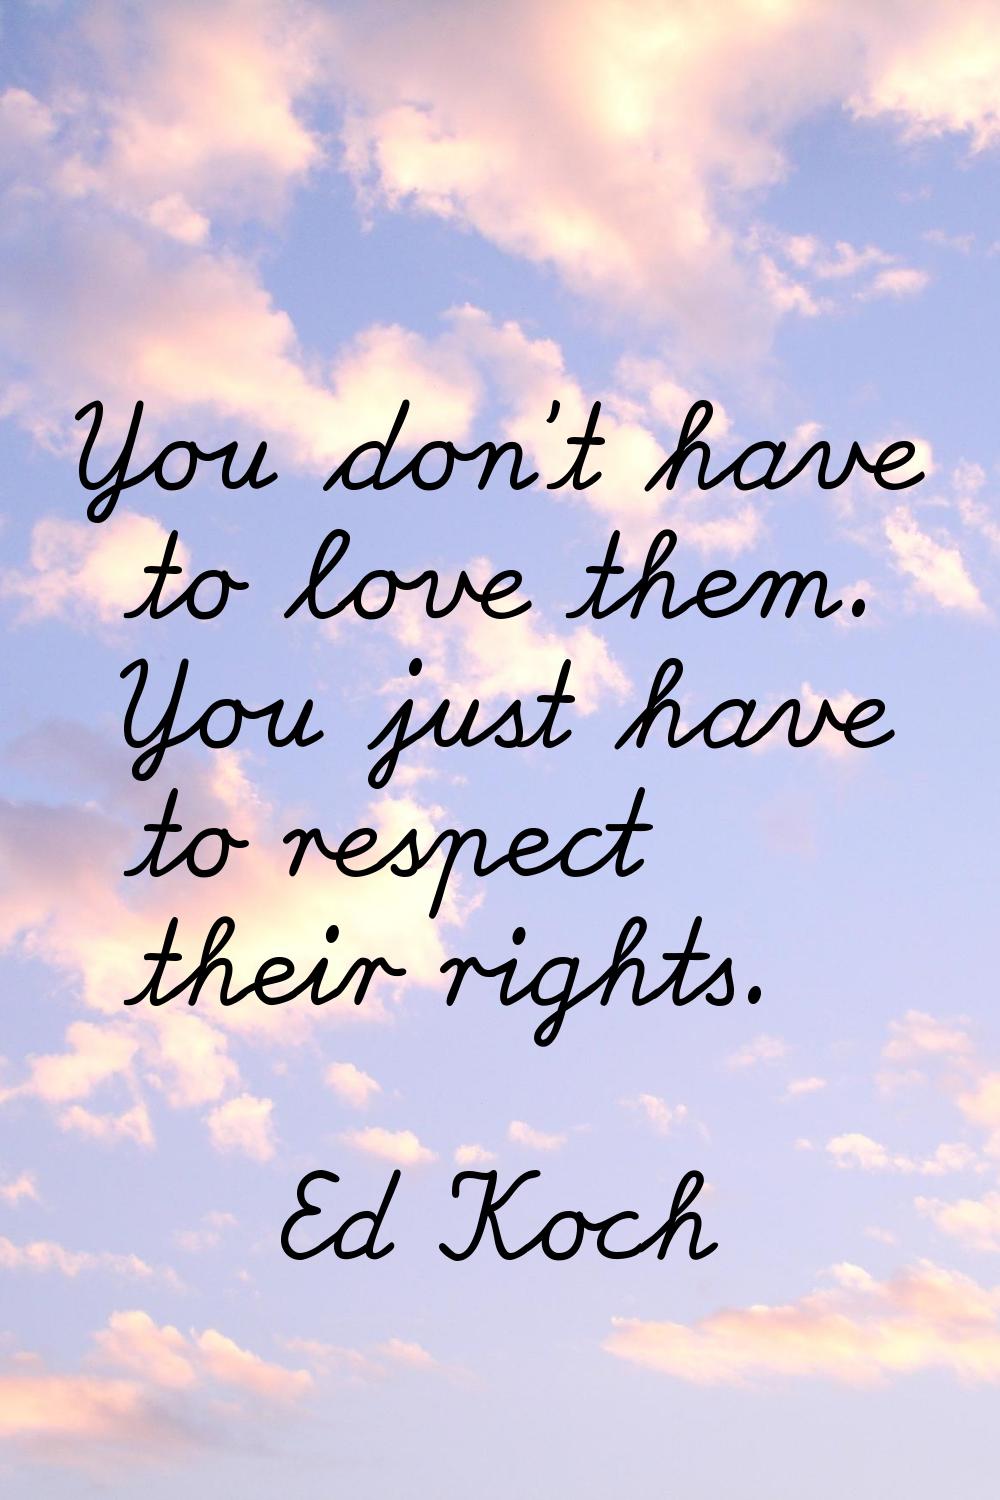 You don't have to love them. You just have to respect their rights.